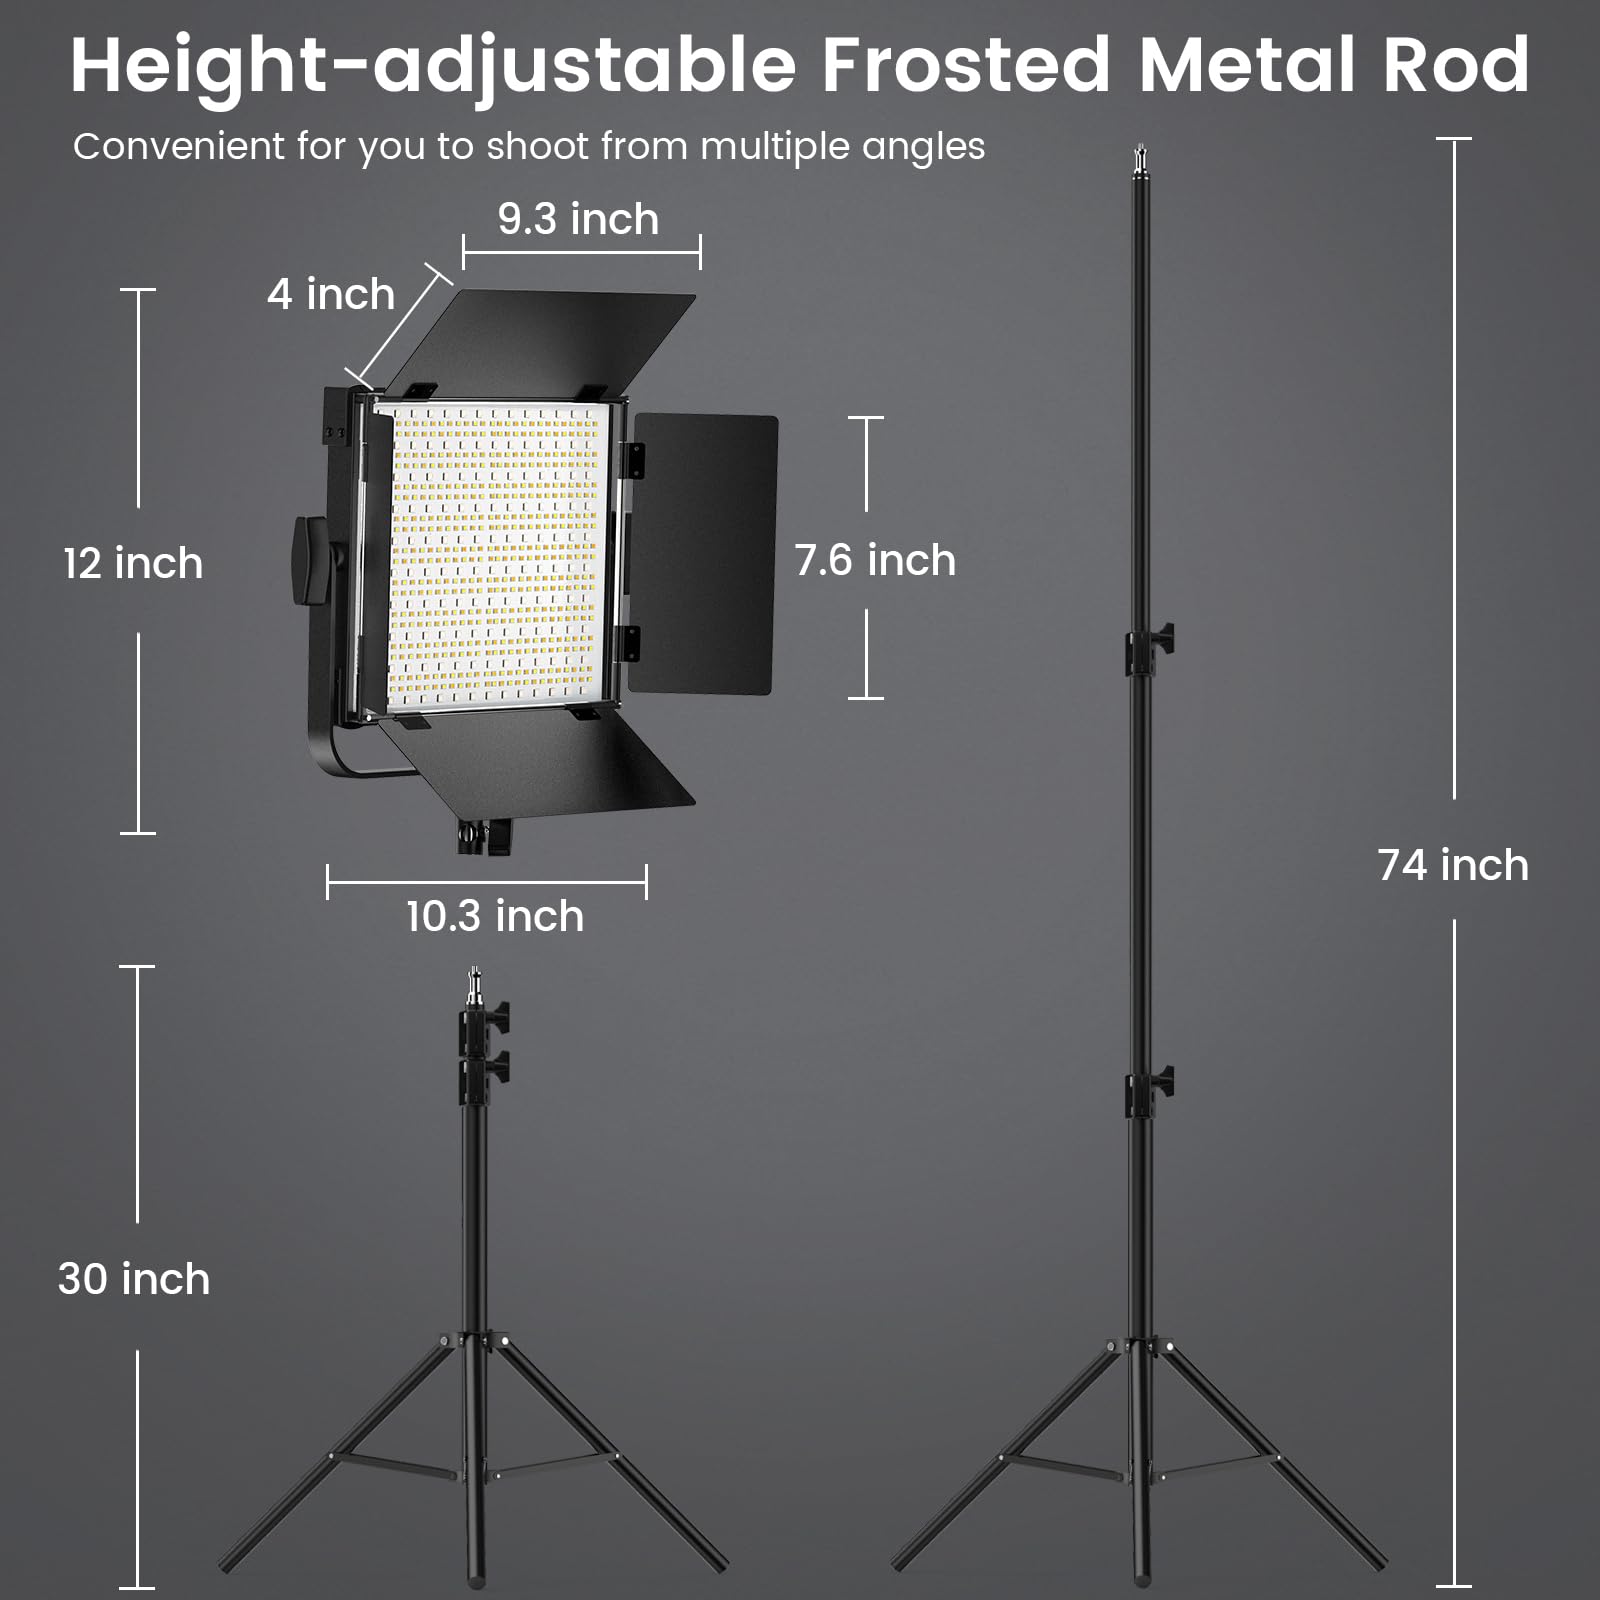 RGB Photography Video Lighting Kit, 2 Pack 50W Bi-Color Energy-Saving LED Video Studio Lights with 2300k~8500k Dimmable CRI 97+ for Filming Camera Photo Recording Stage Shooting Streaming YouTube TikT